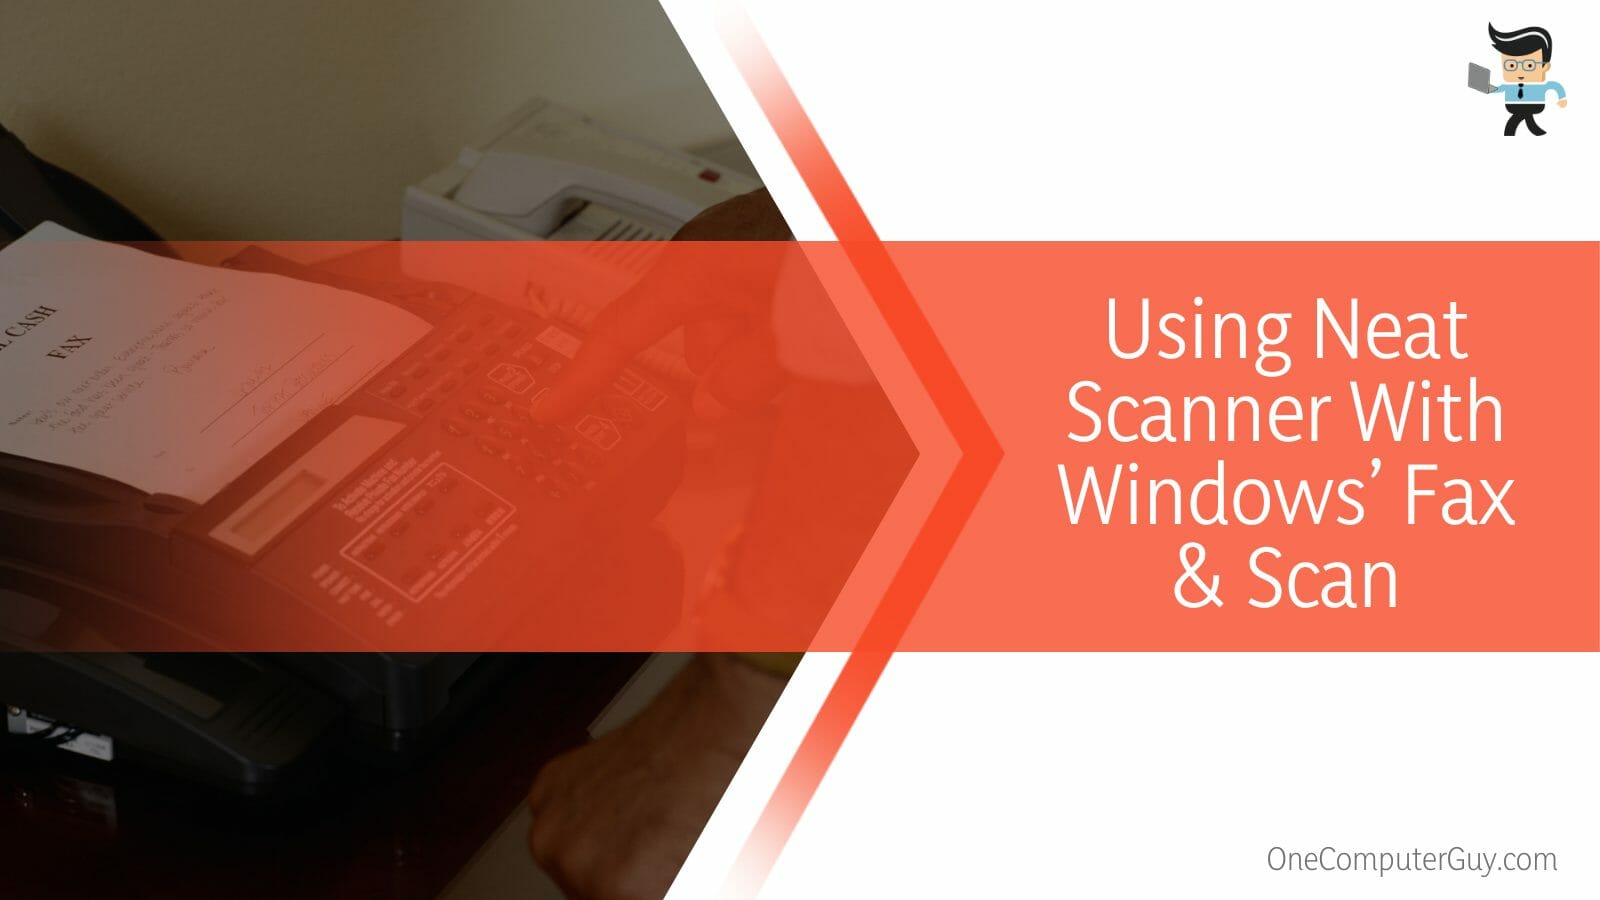 Using Neat Scanner With Windows’ Fax & Scan